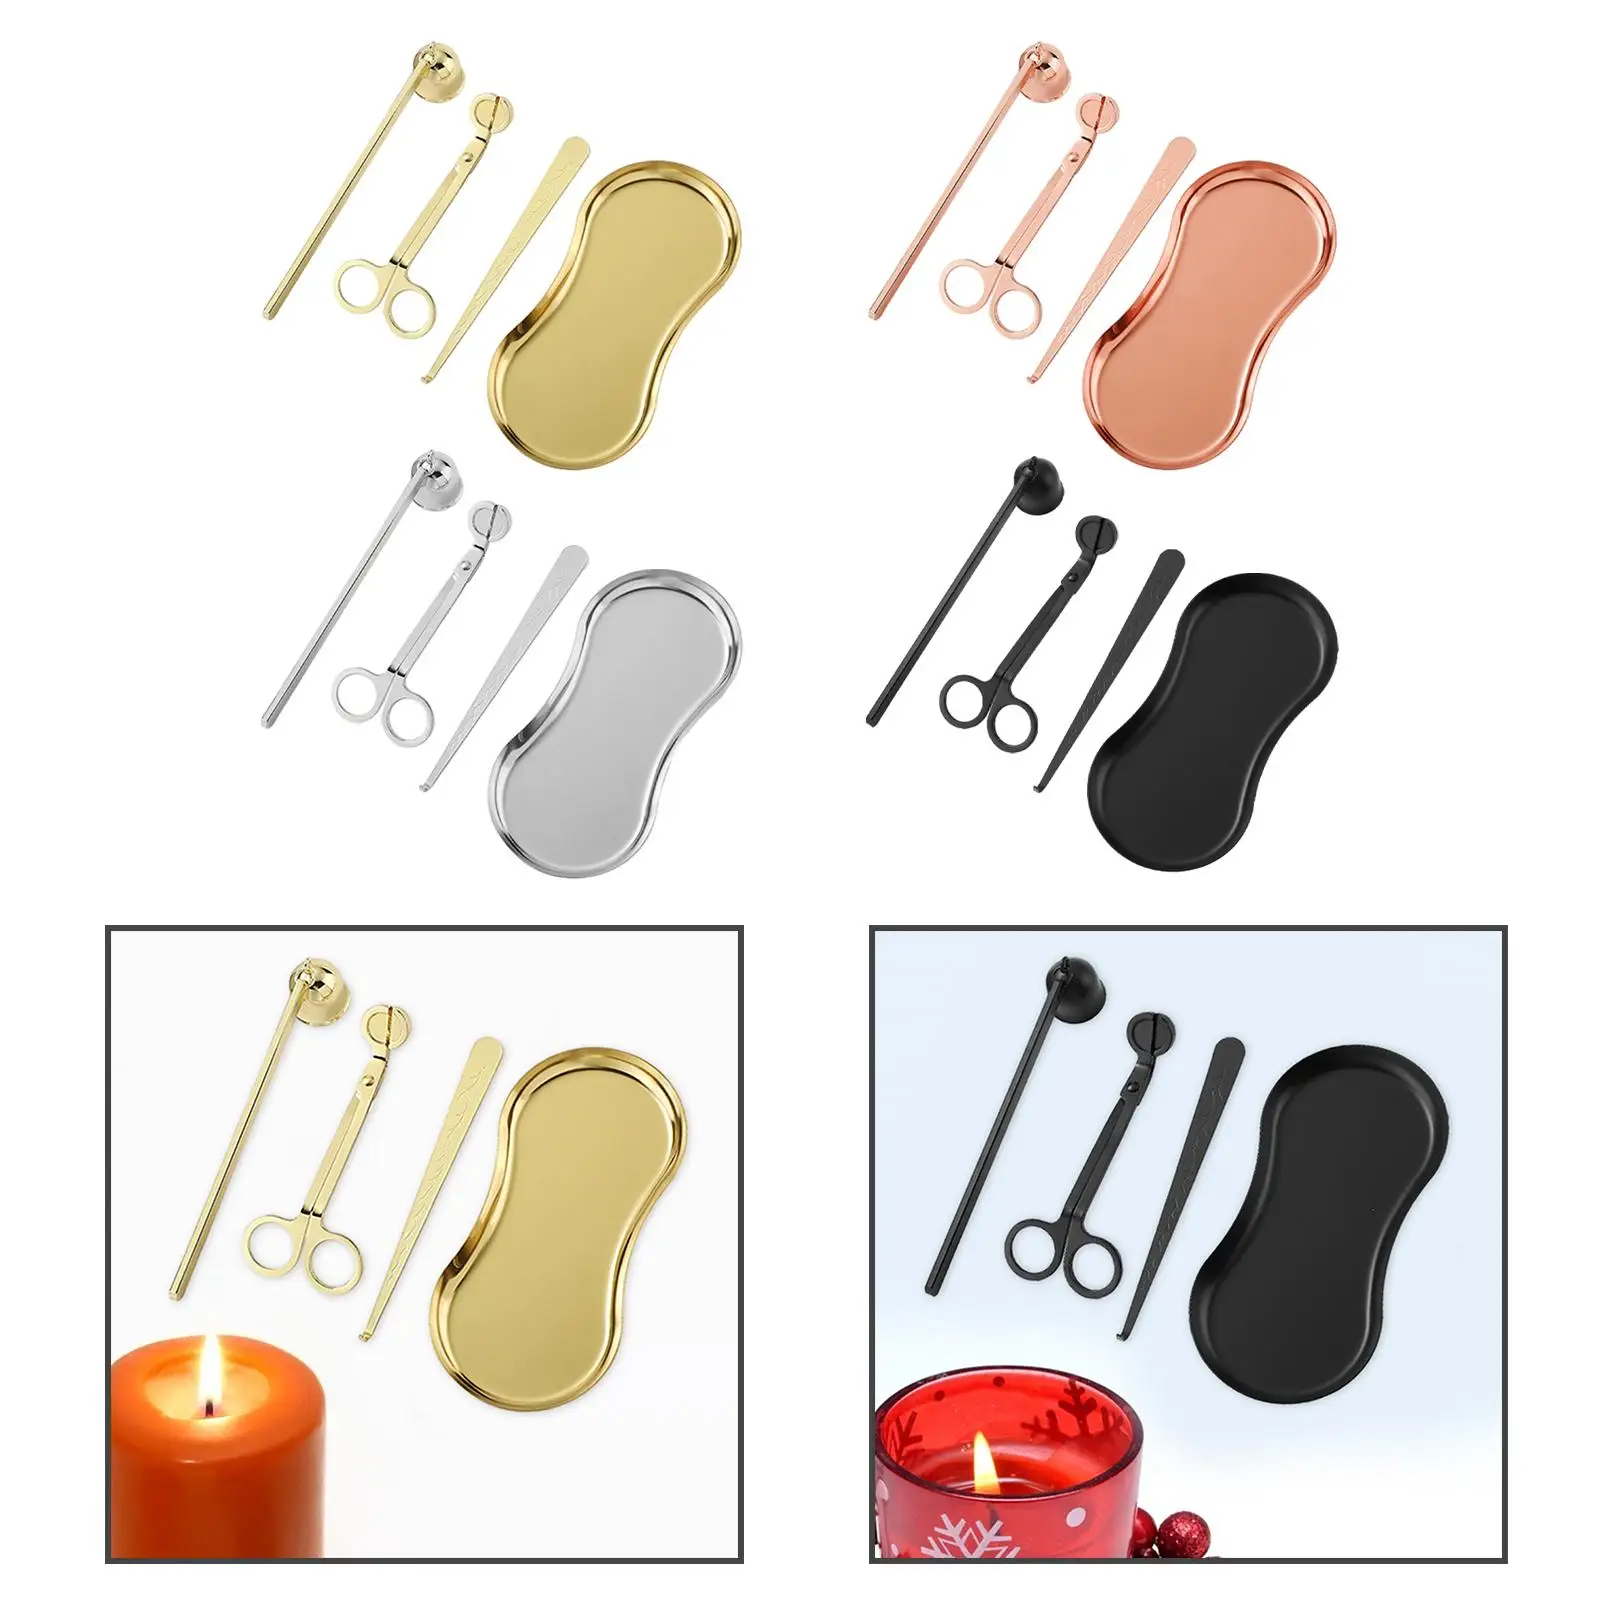 4 in 1 Candle Wick Trimmer Snuffer Set Candle Wick Clipper Exquisite Multipurpose Sturdy with Tray Plate Stainless Steel